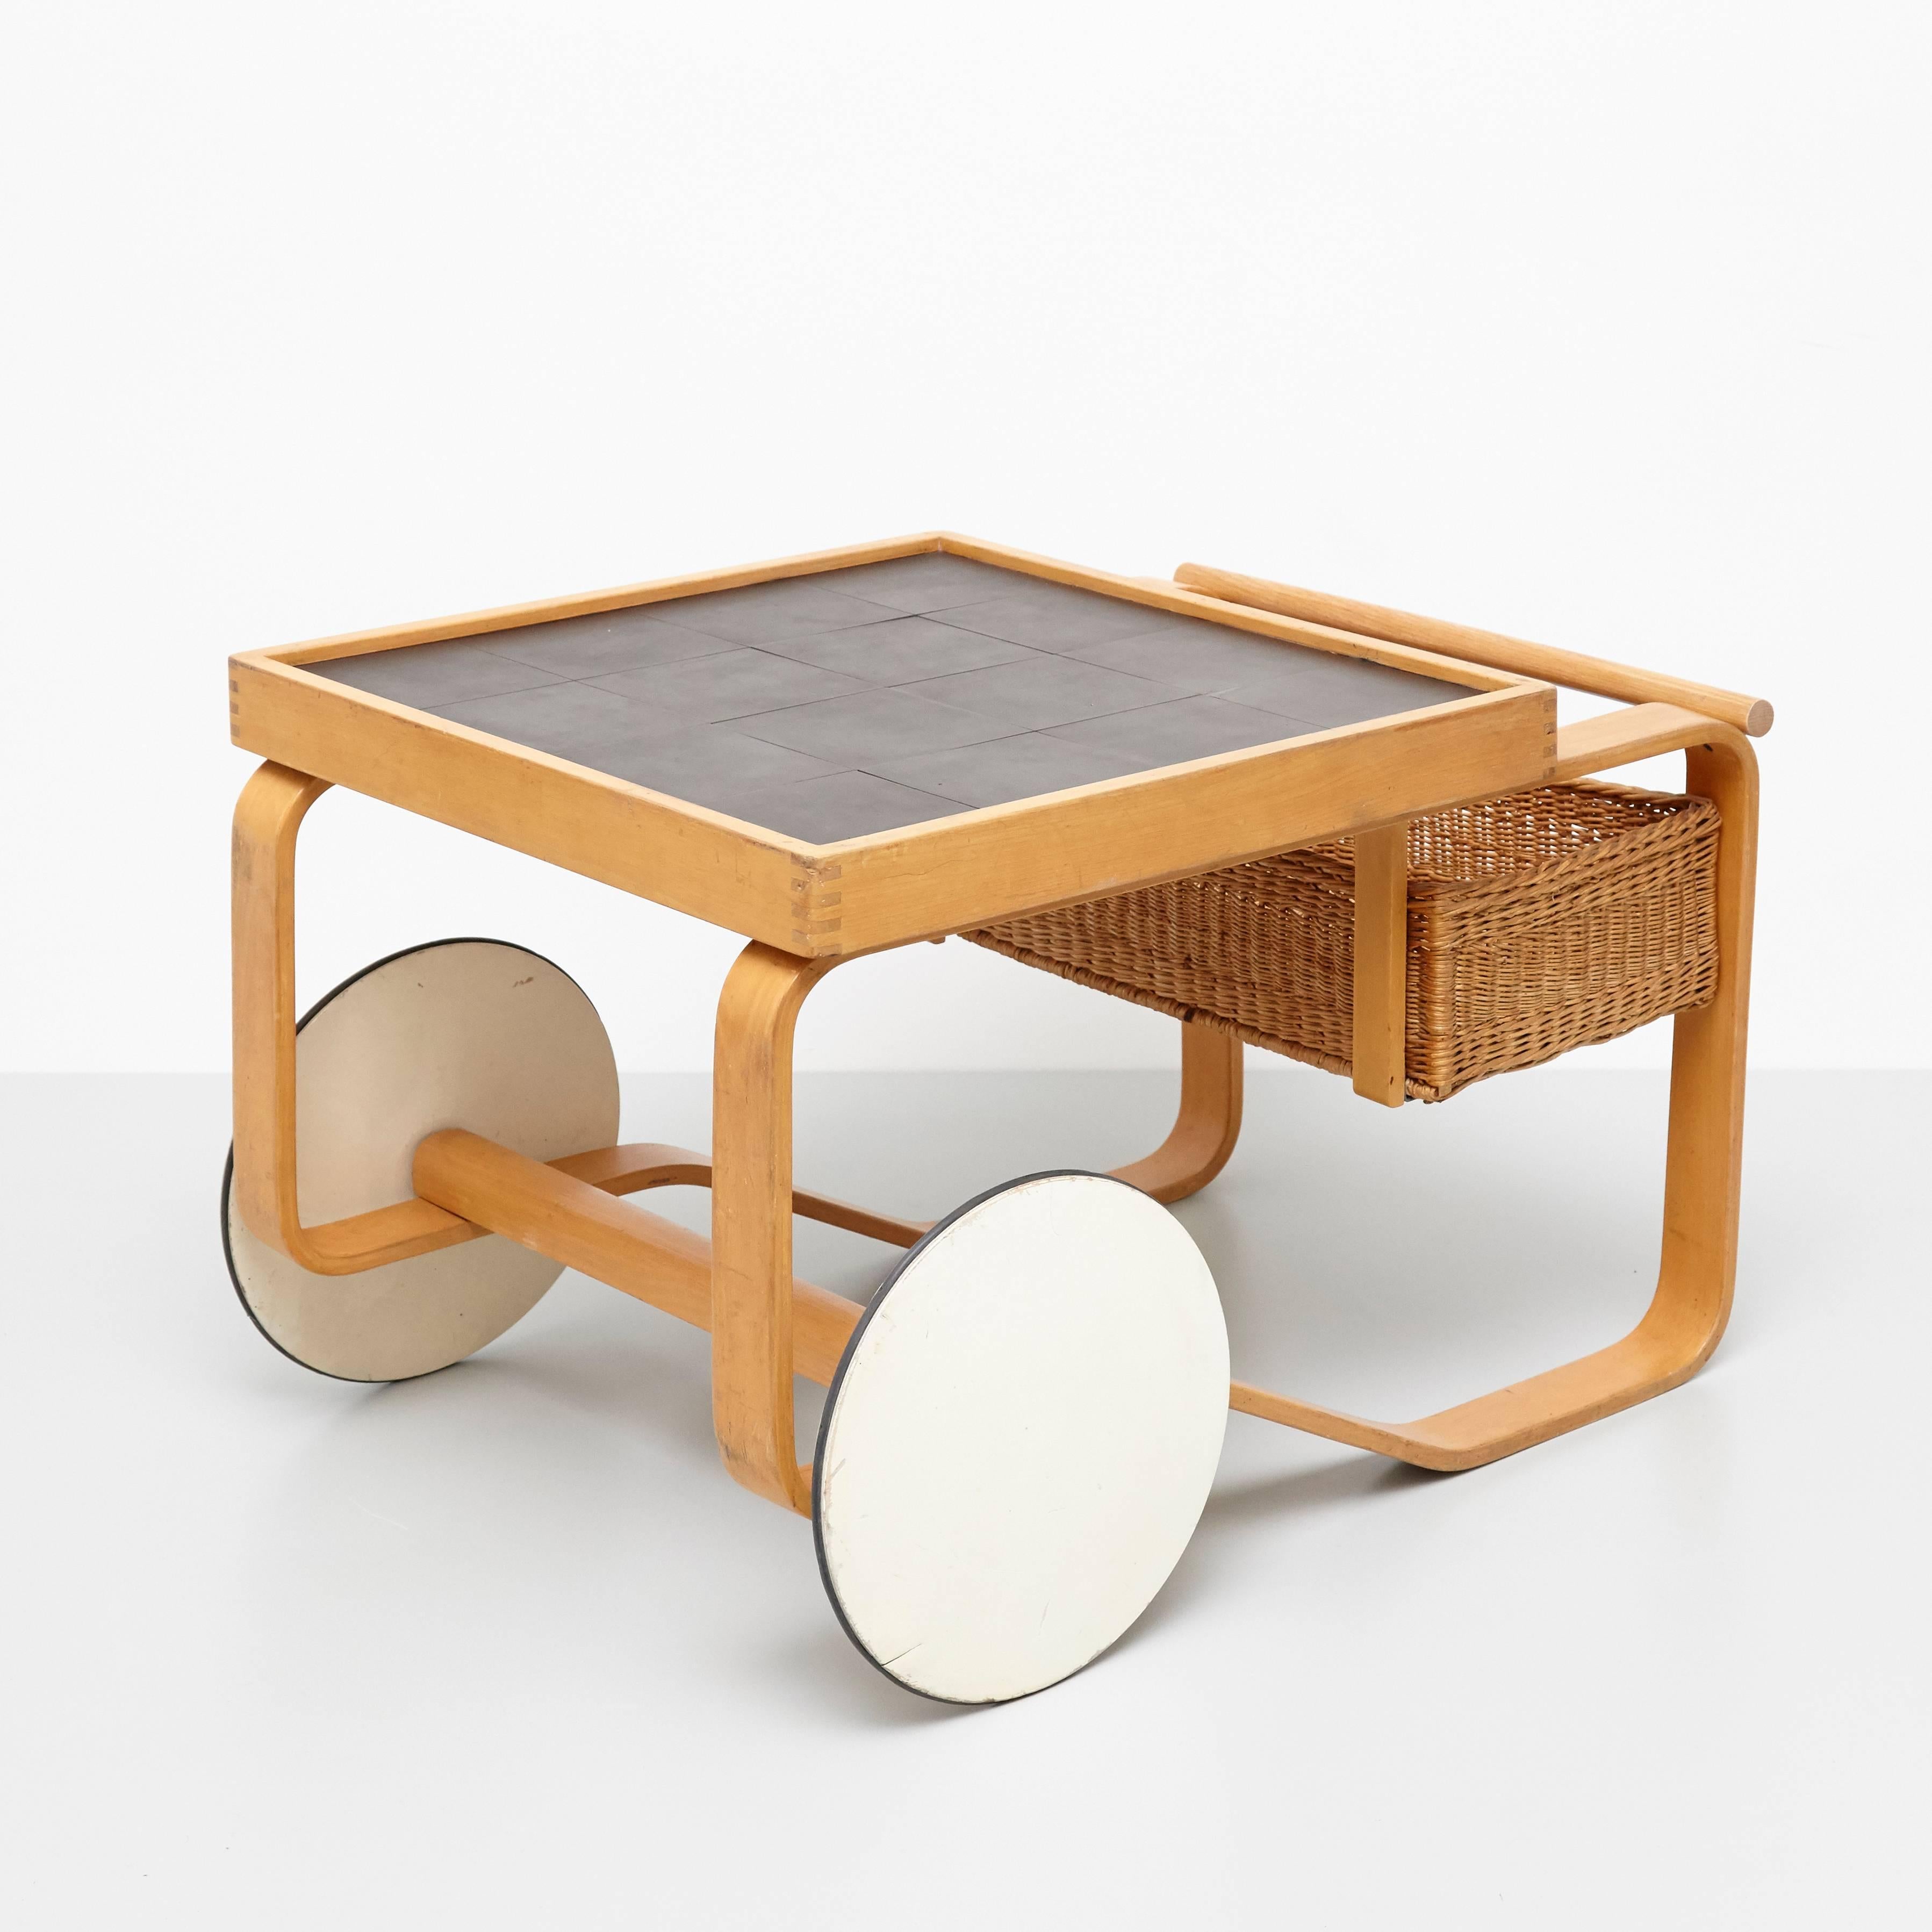 Tea trolley model 900, designed by Alvar Aalto for Artek, Finland, 1935. 

Birch, ceramic tiles and cane.

64 x 91 x 59 cm

In great original condition, with minor wear consistent with age and use, preserving a beautiful patina. 

Hugo Alvar